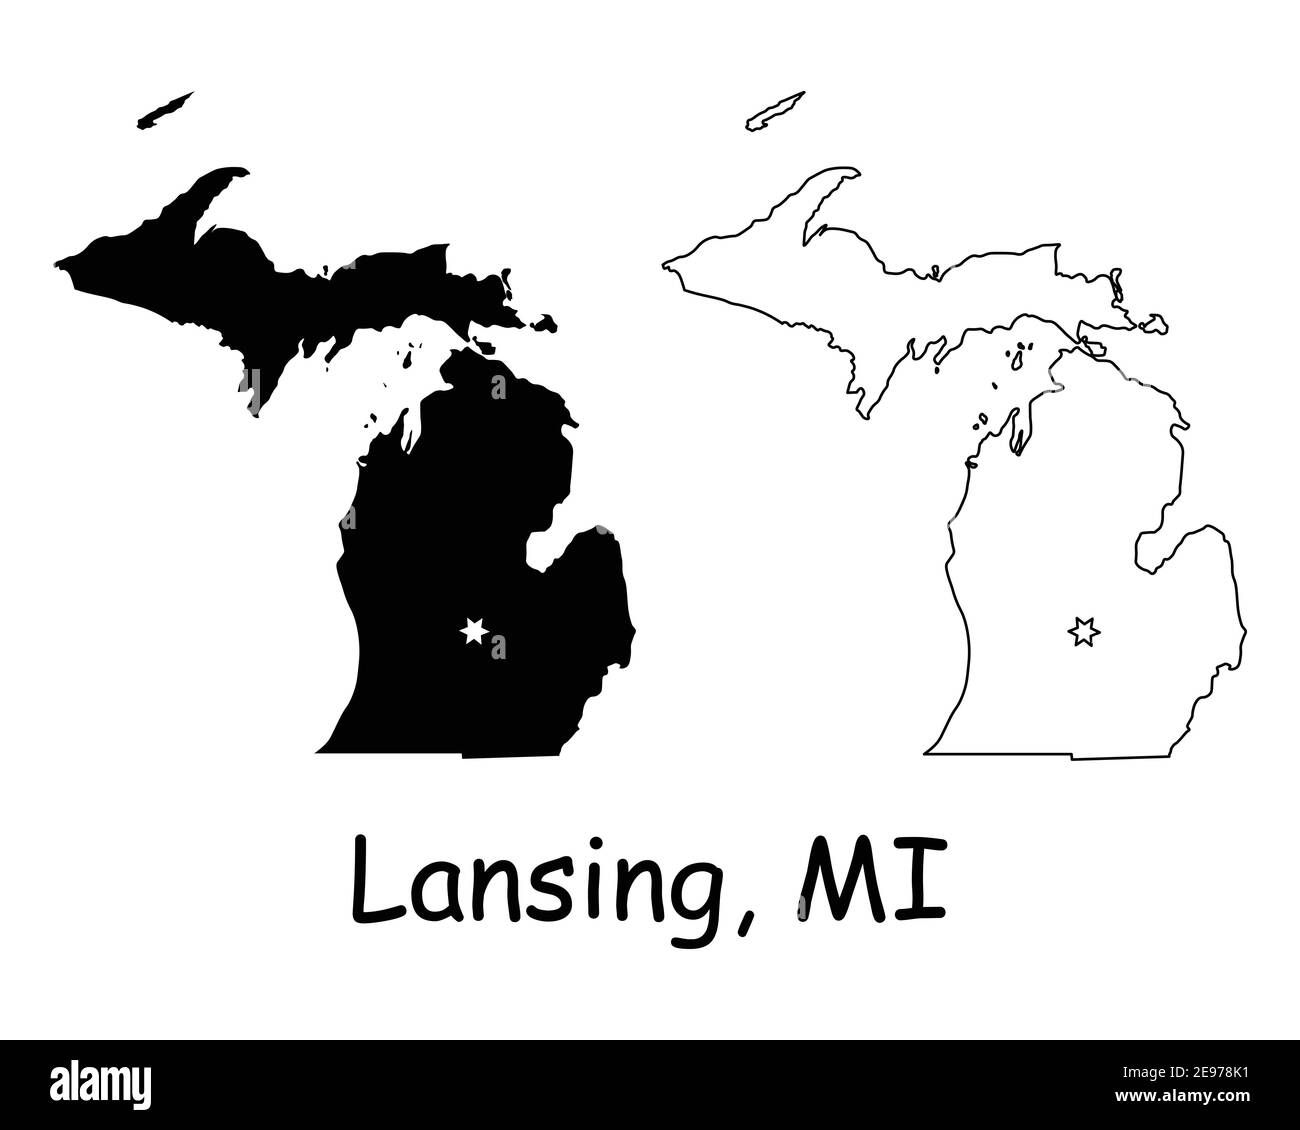 Michigan MI state Map USA with Capital City Star at Lansing. Black silhouette and outline isolated on a white background. EPS Vector Stock Vector